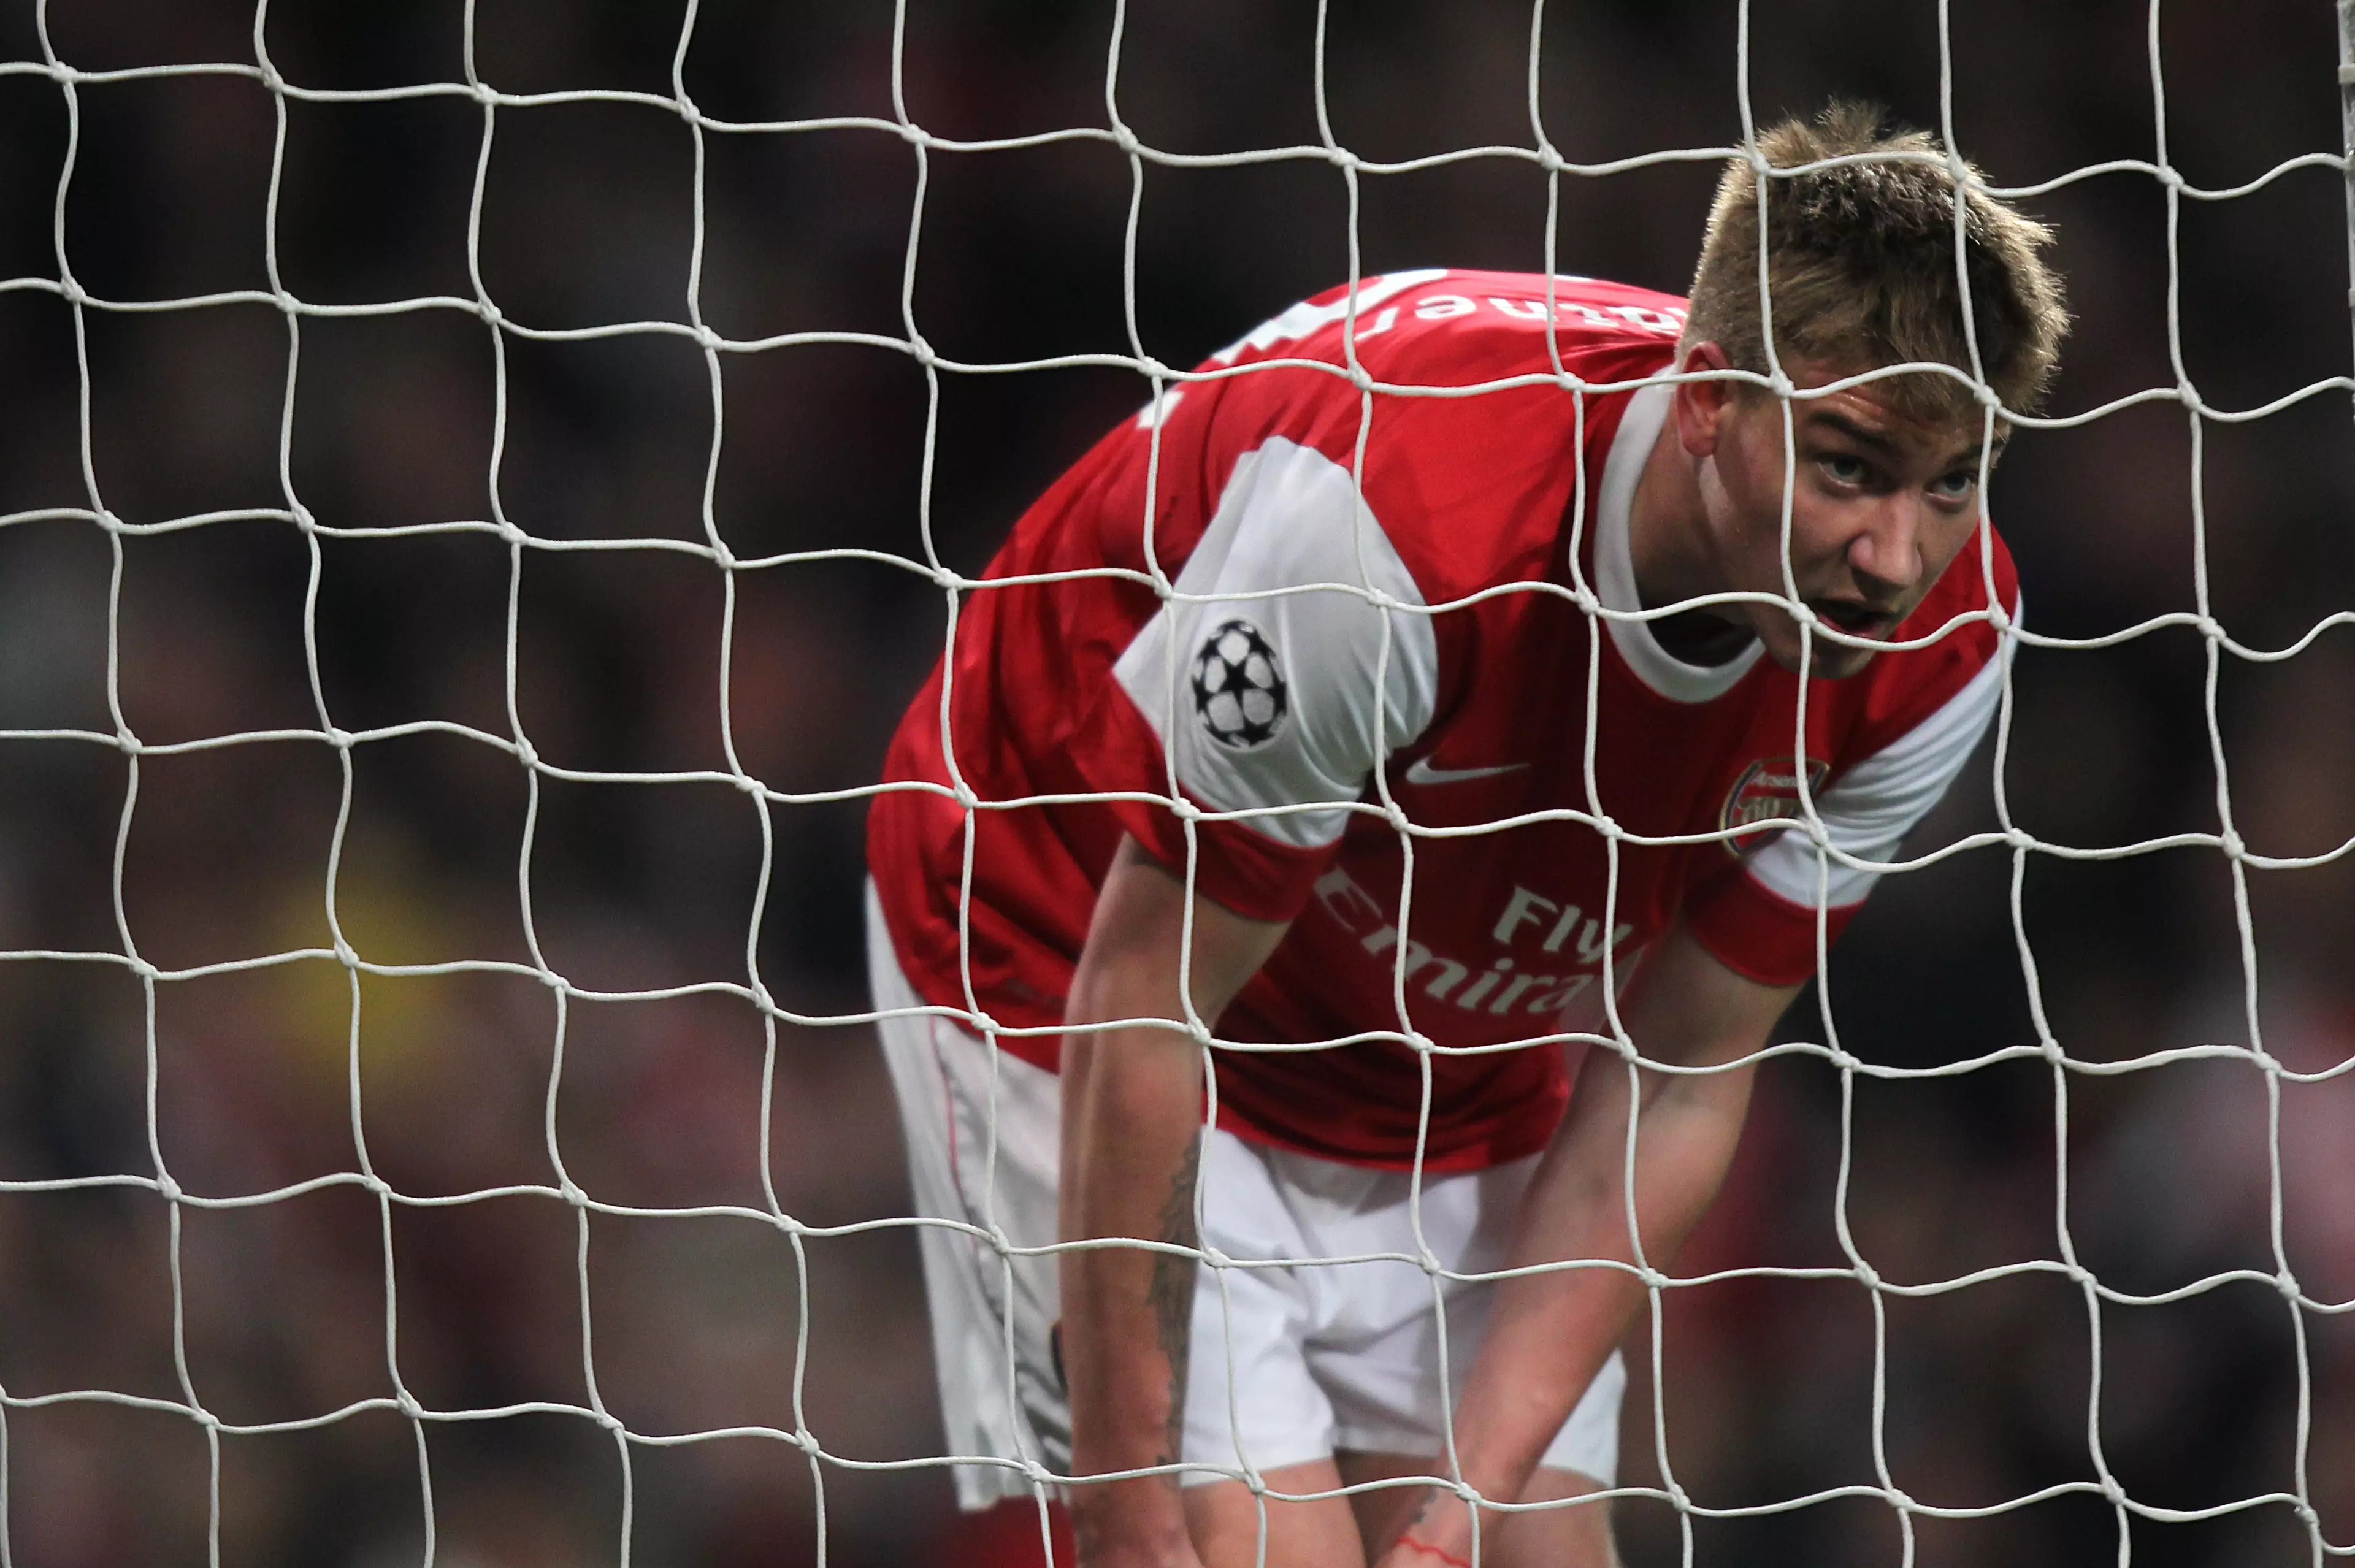 Things didn't work out for Lord Bendtner at Arsenal. Image: PA Images